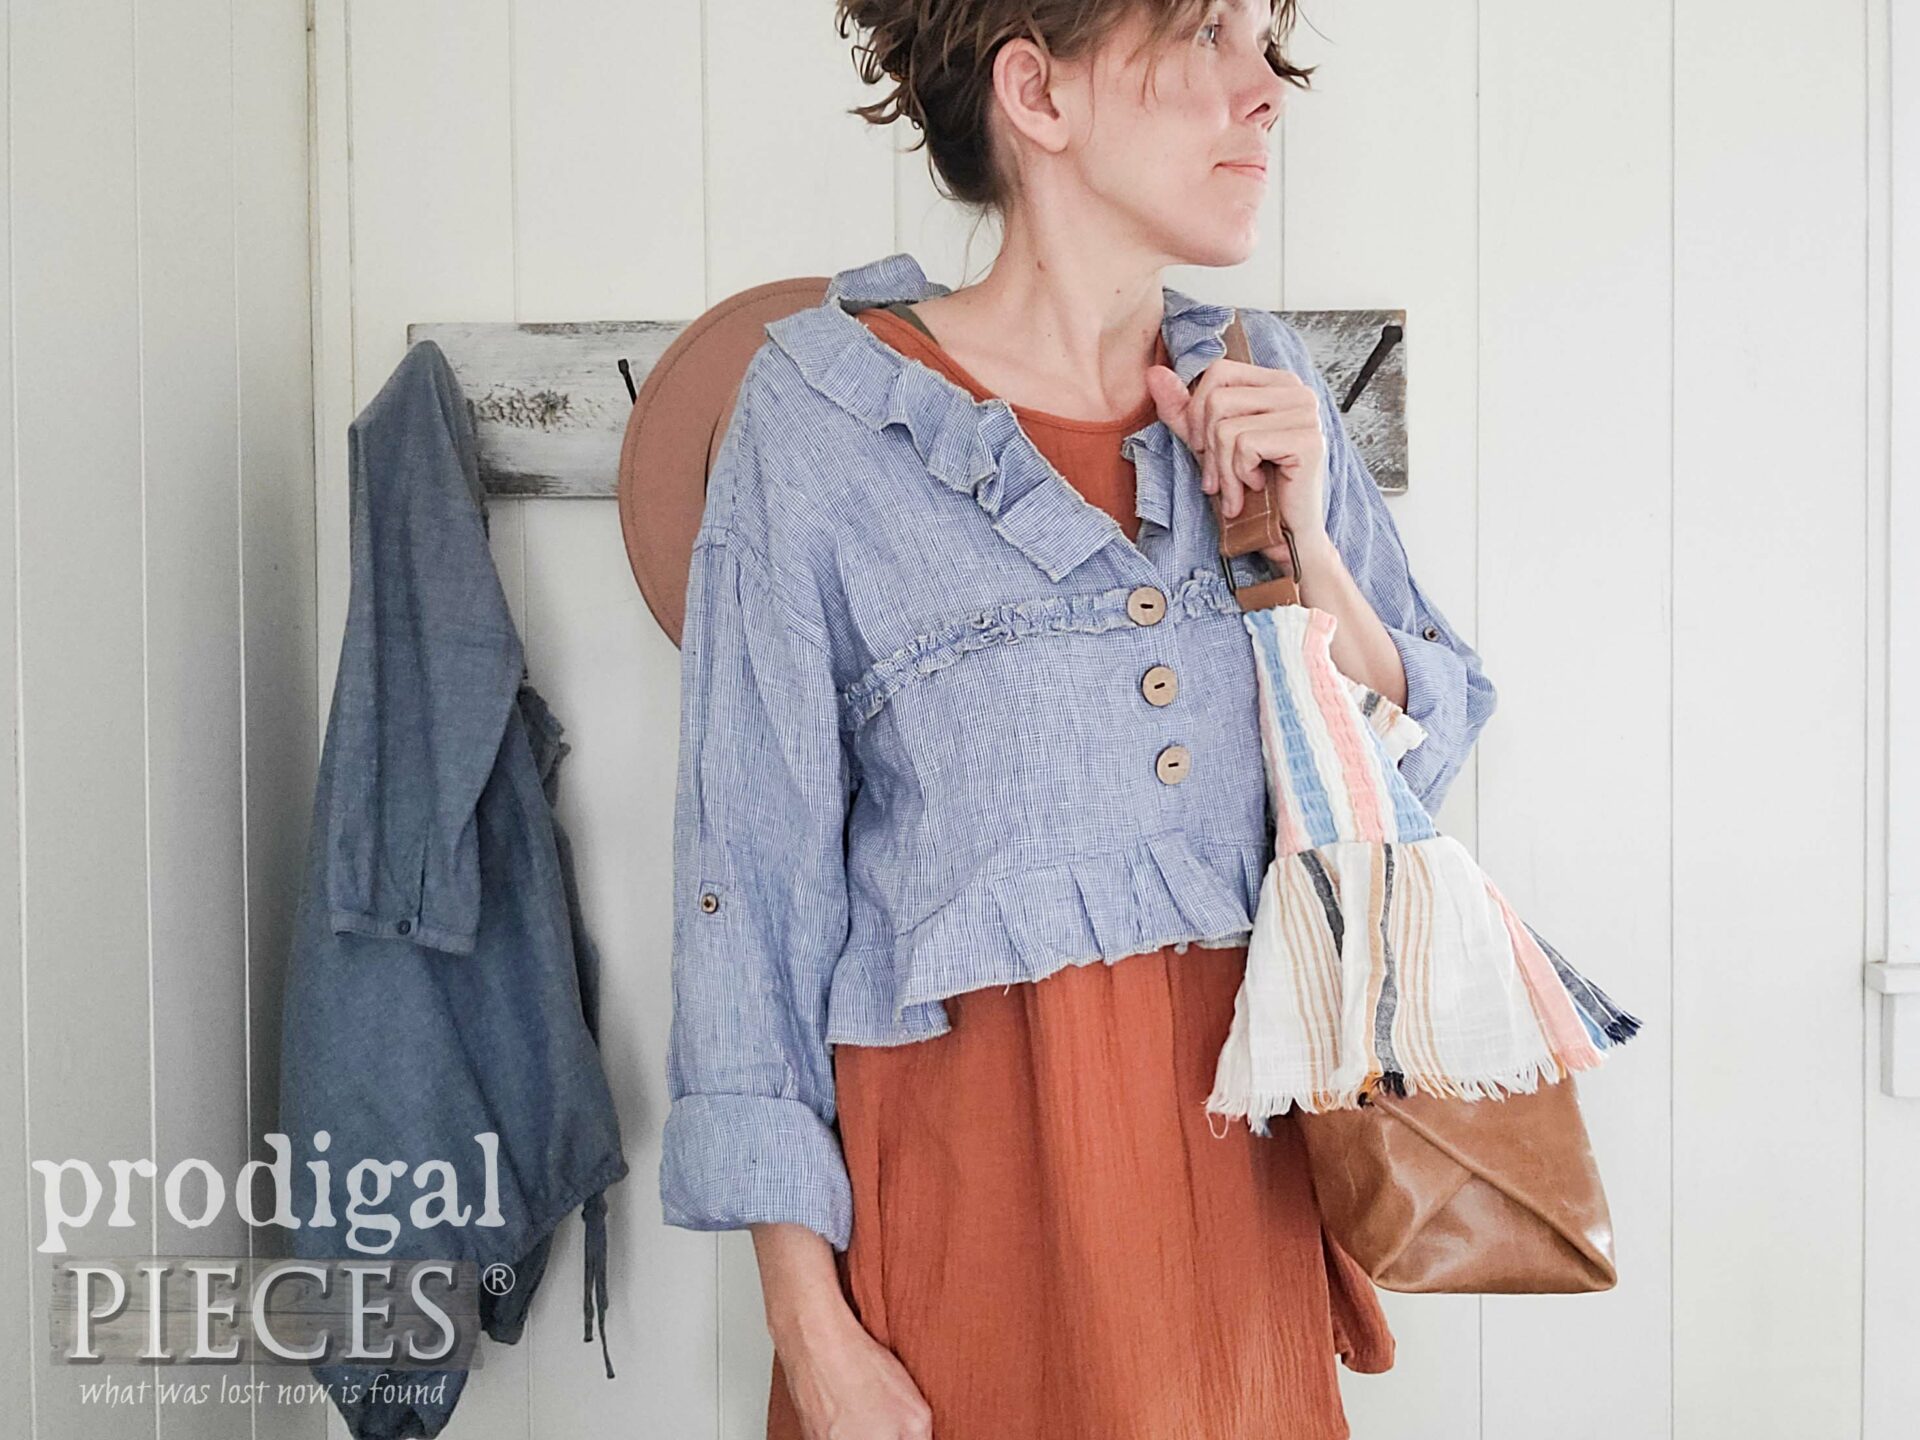 Larissa of Prodigal Pieces with her Refashioned Jacket and Purse | prodigalpieces.com #prodigalpieces #refashioned #fashion #style